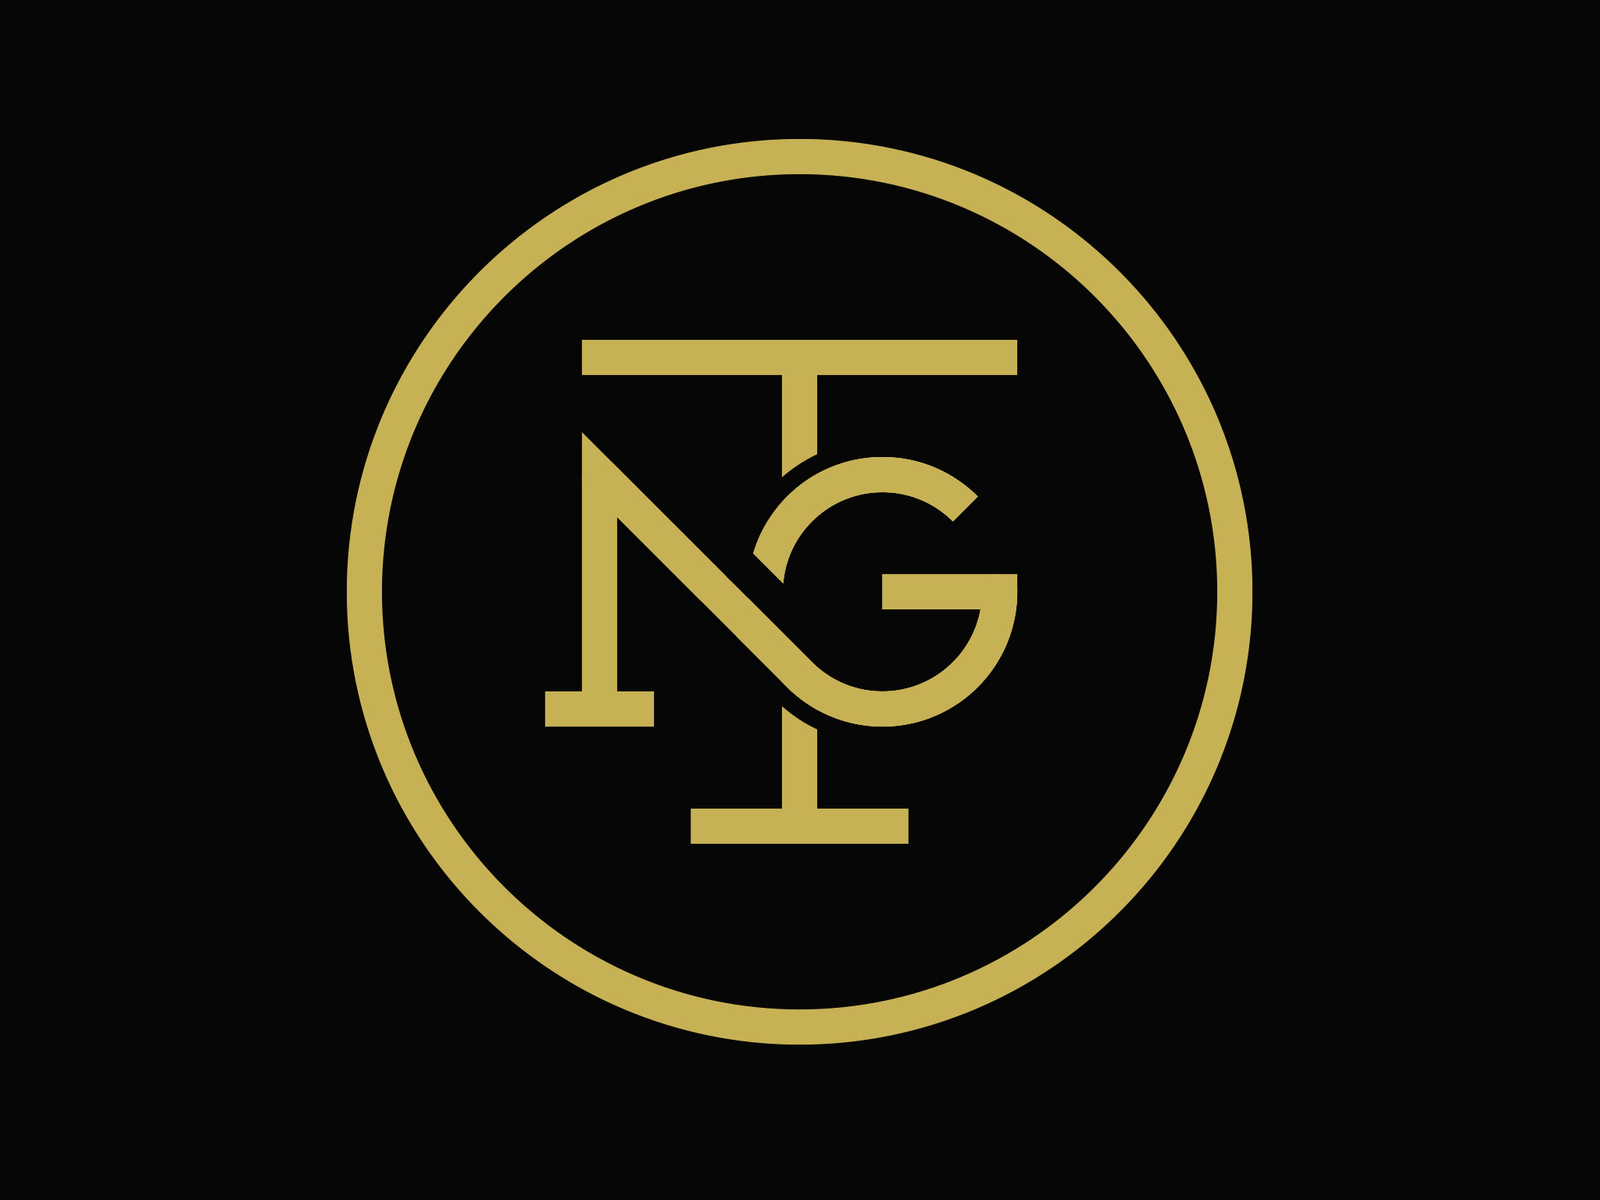 tng-logo-by-arno-claude-on-dribbble